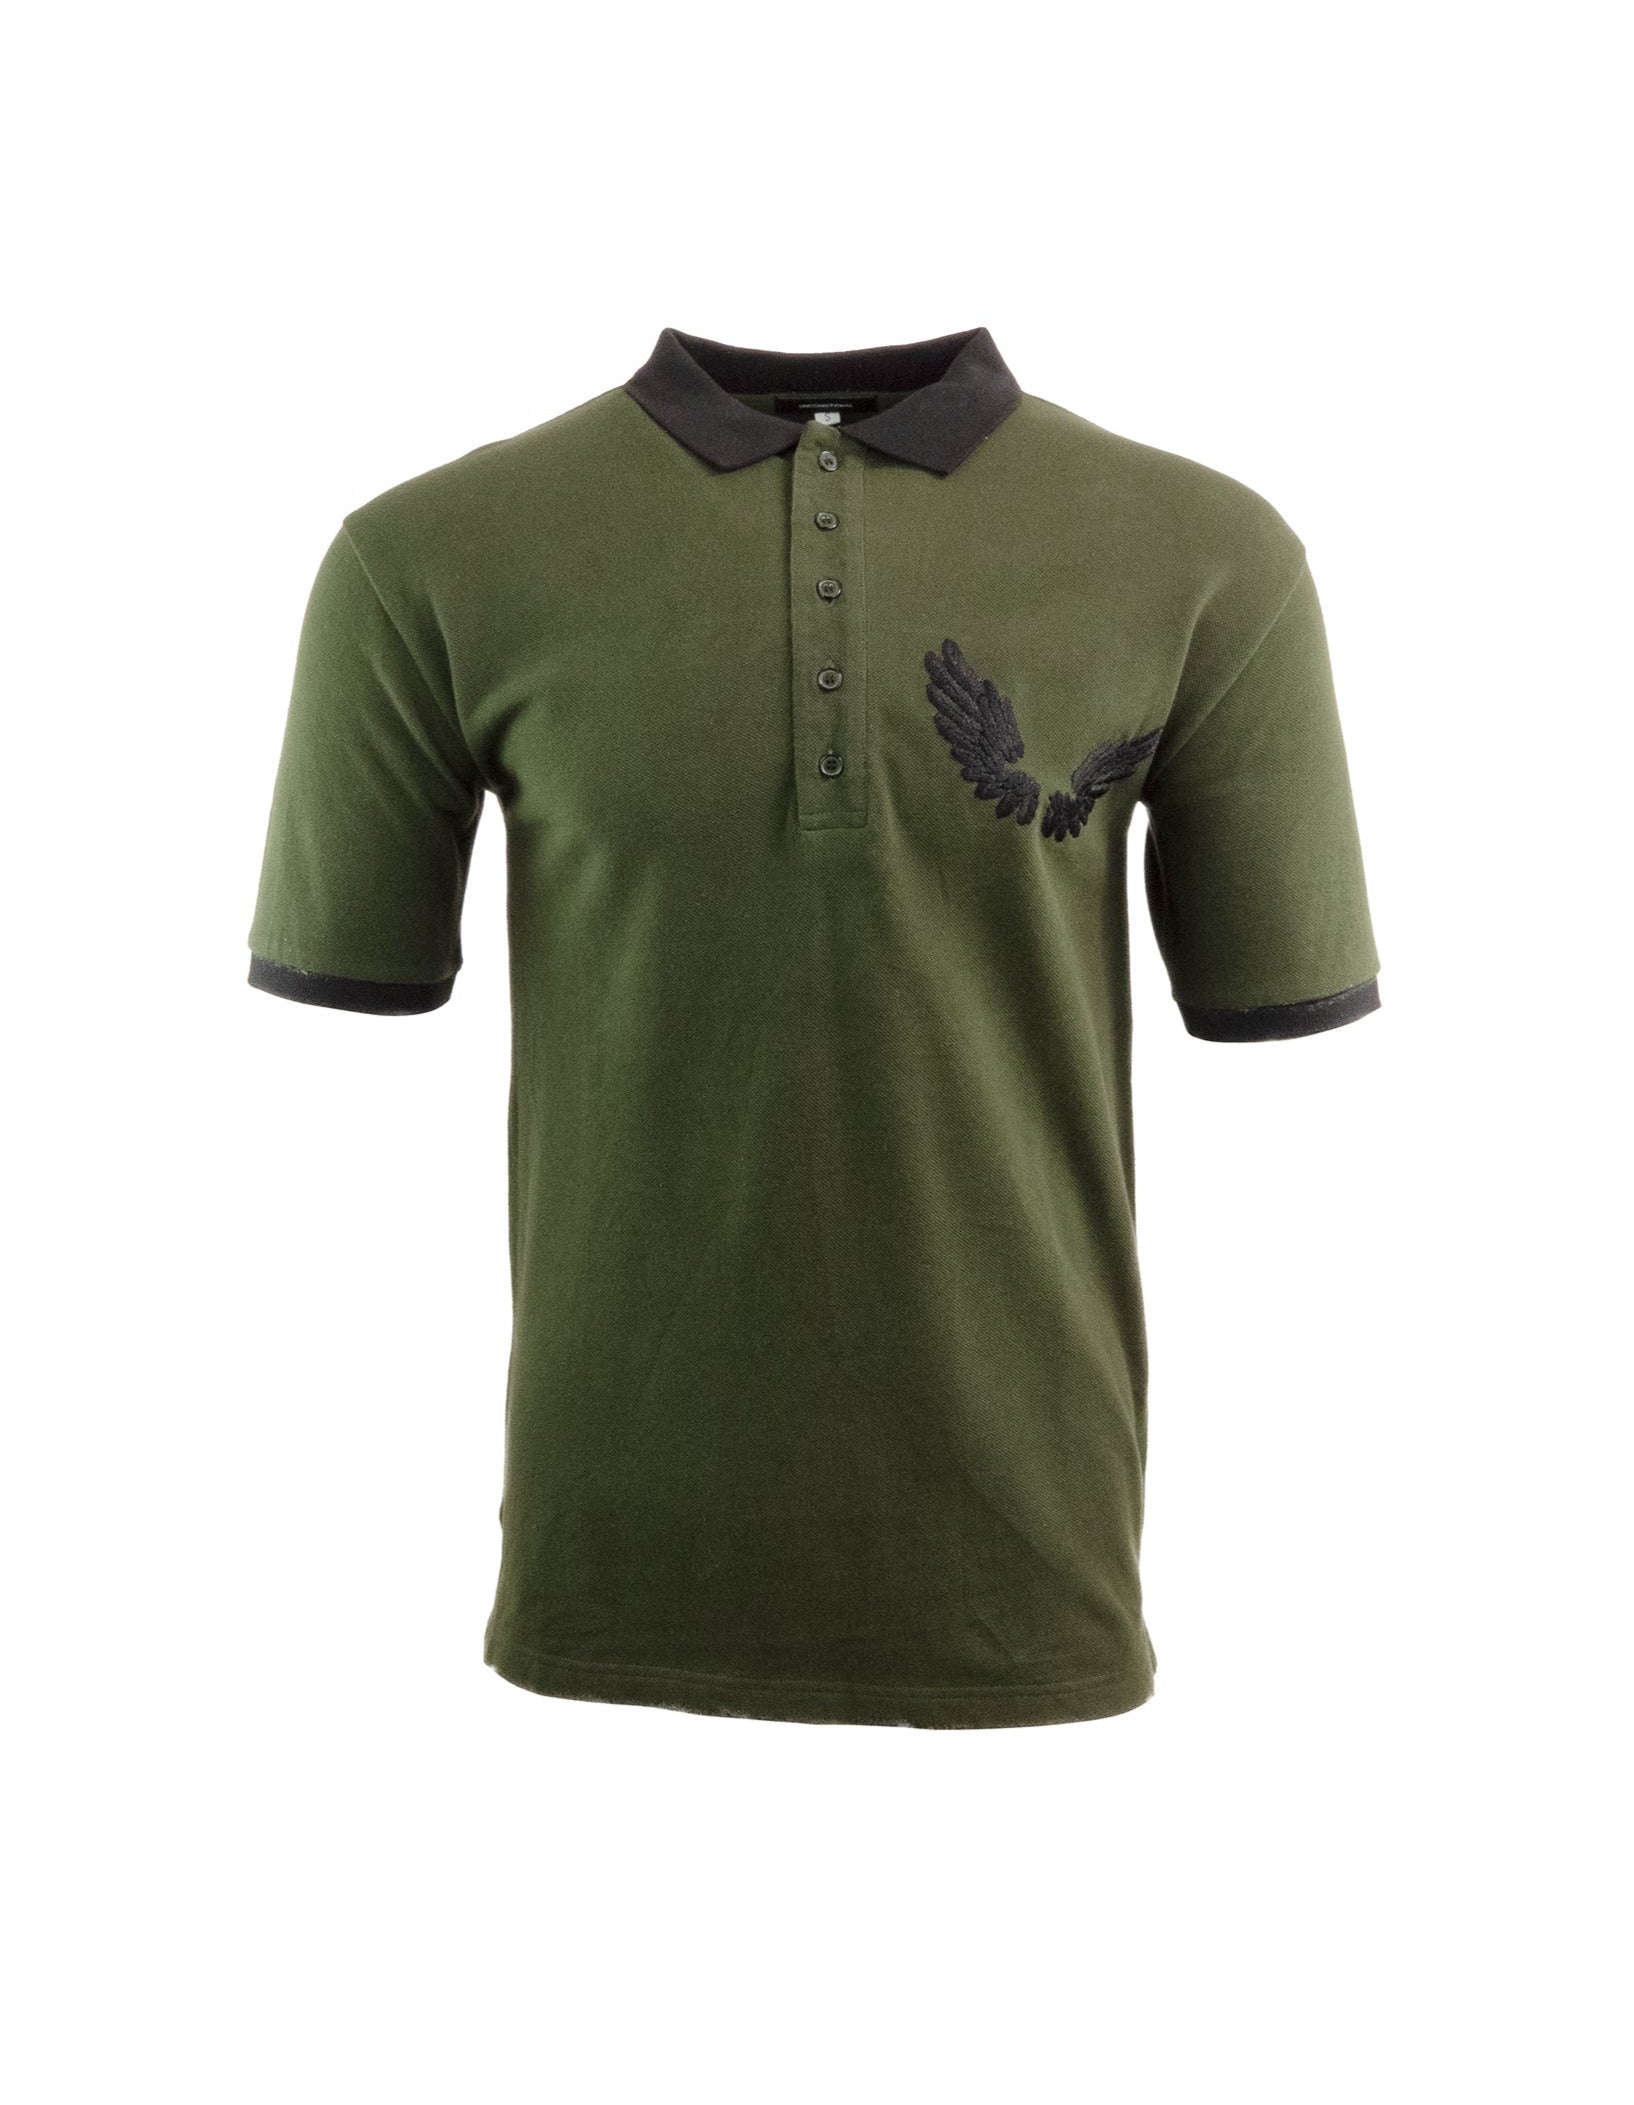 KHAKI EMBROIDERED WINGS POLO TOP